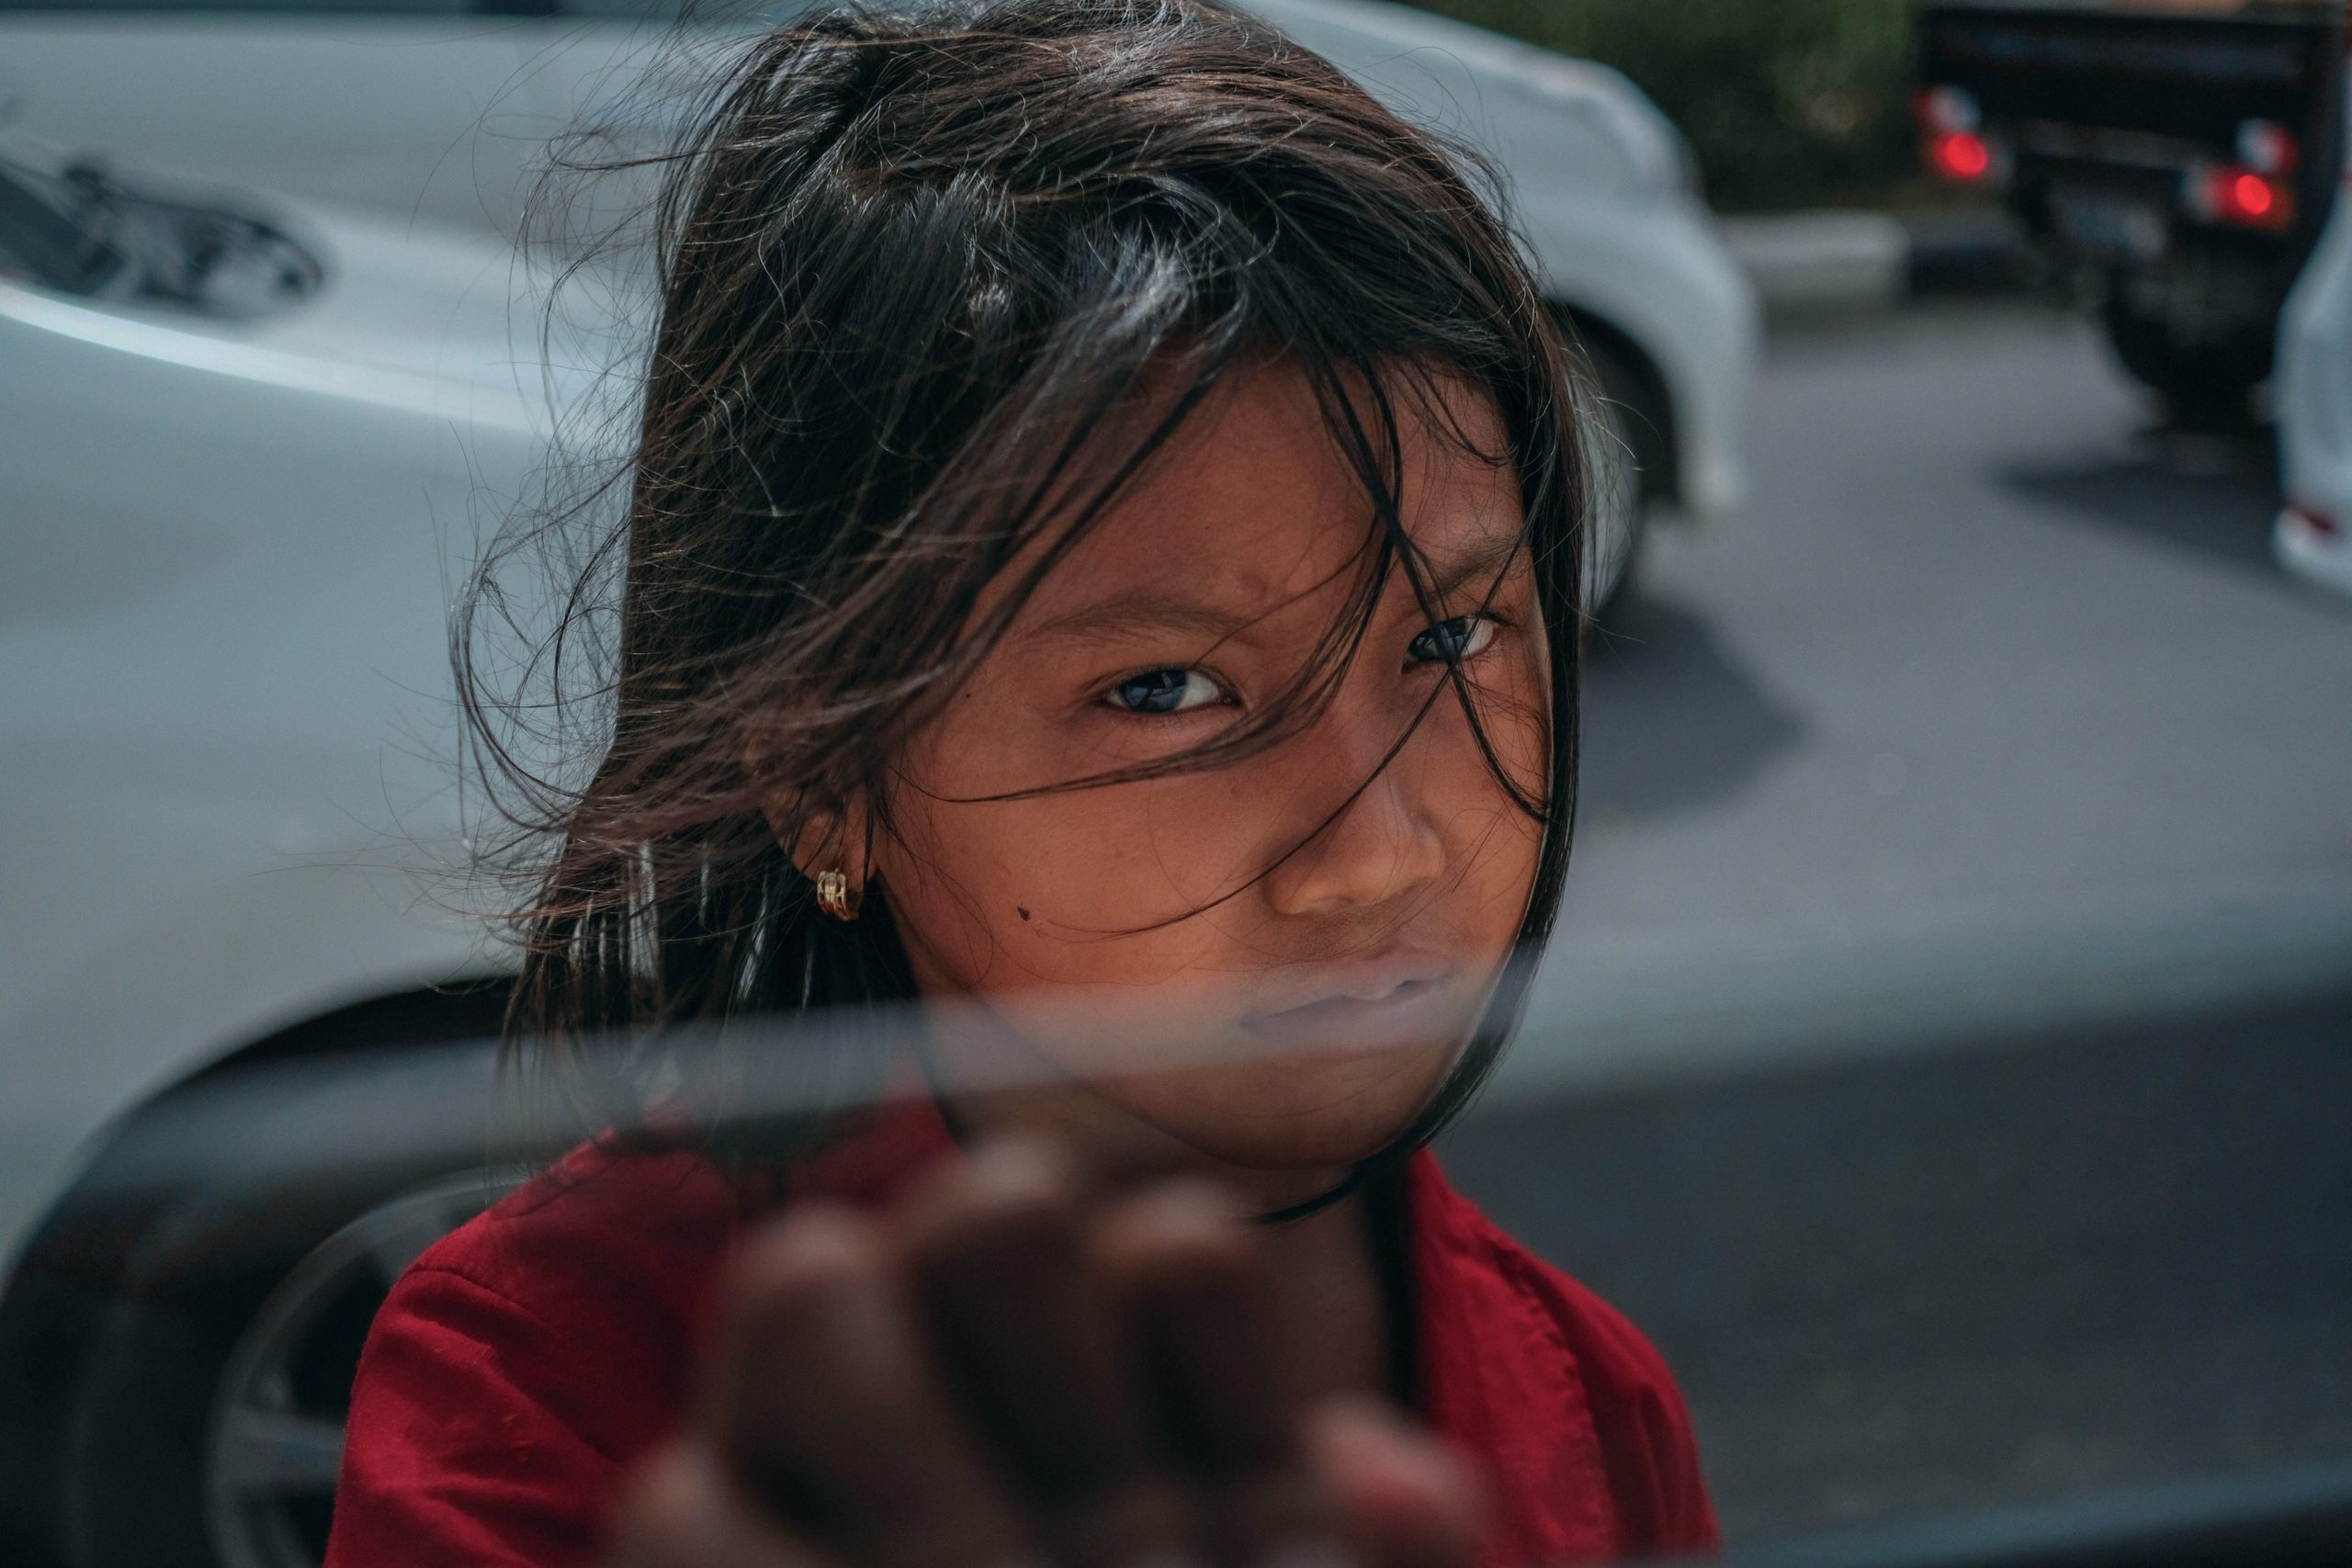 Young girl on street reaching up to car window